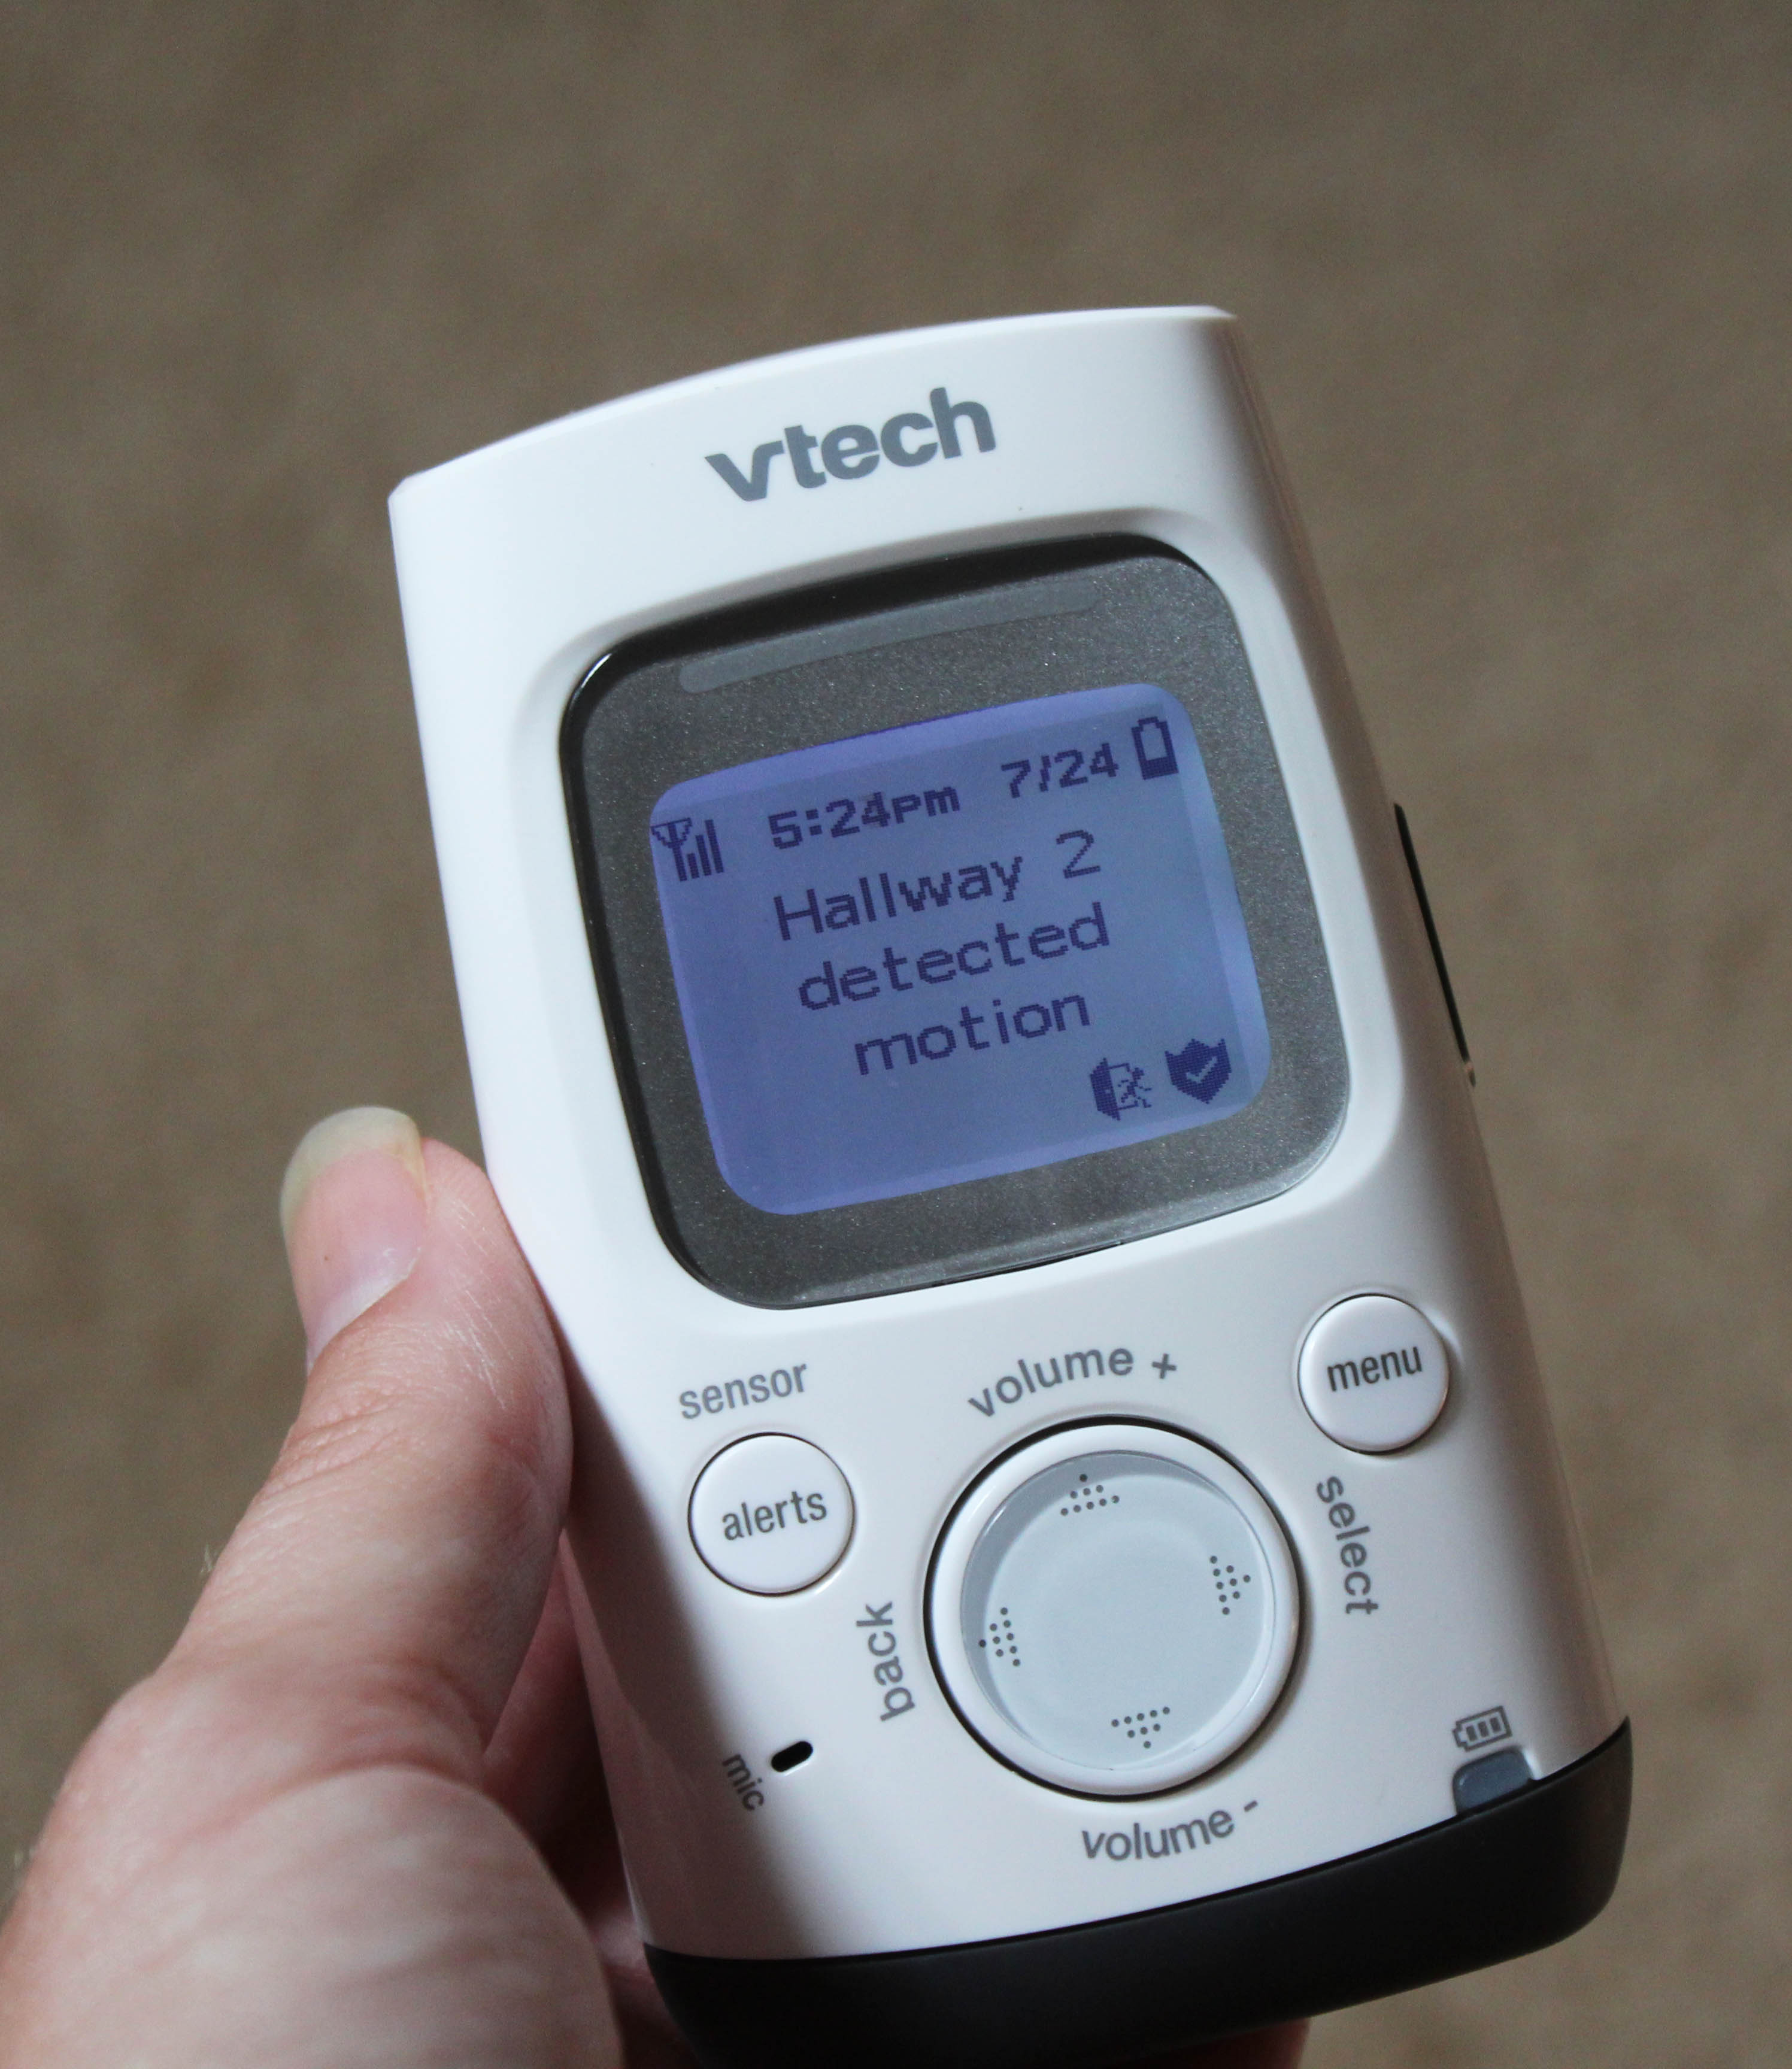 Creating a safe space for toddlers and sleepwalking children #VTechBaby #ad IsSheReally.com